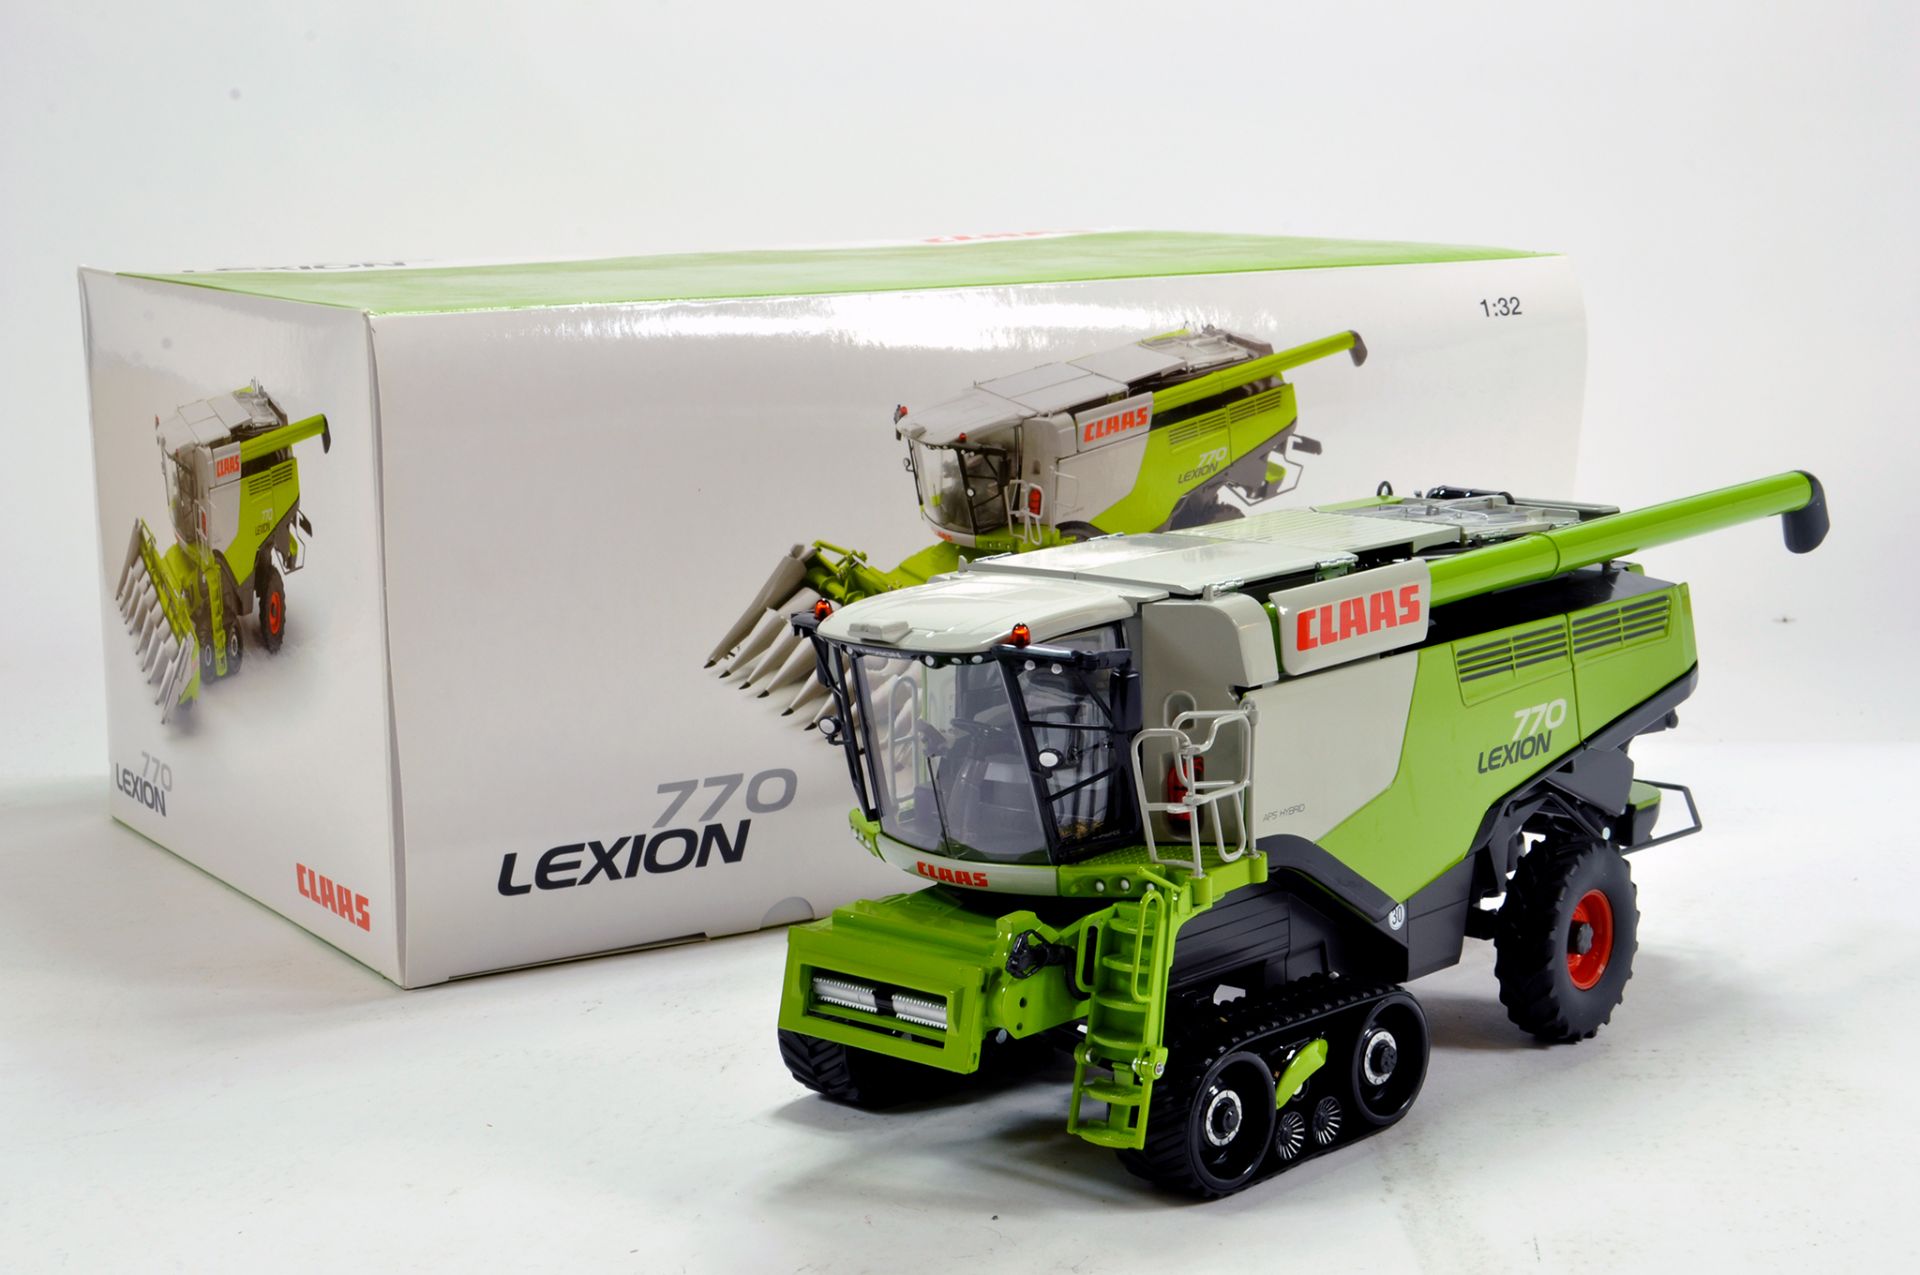 Wiking 1/32 Farm Issue comprising Claas Lexion Combine 770 TT with Conspeed Header. Limited Edition.